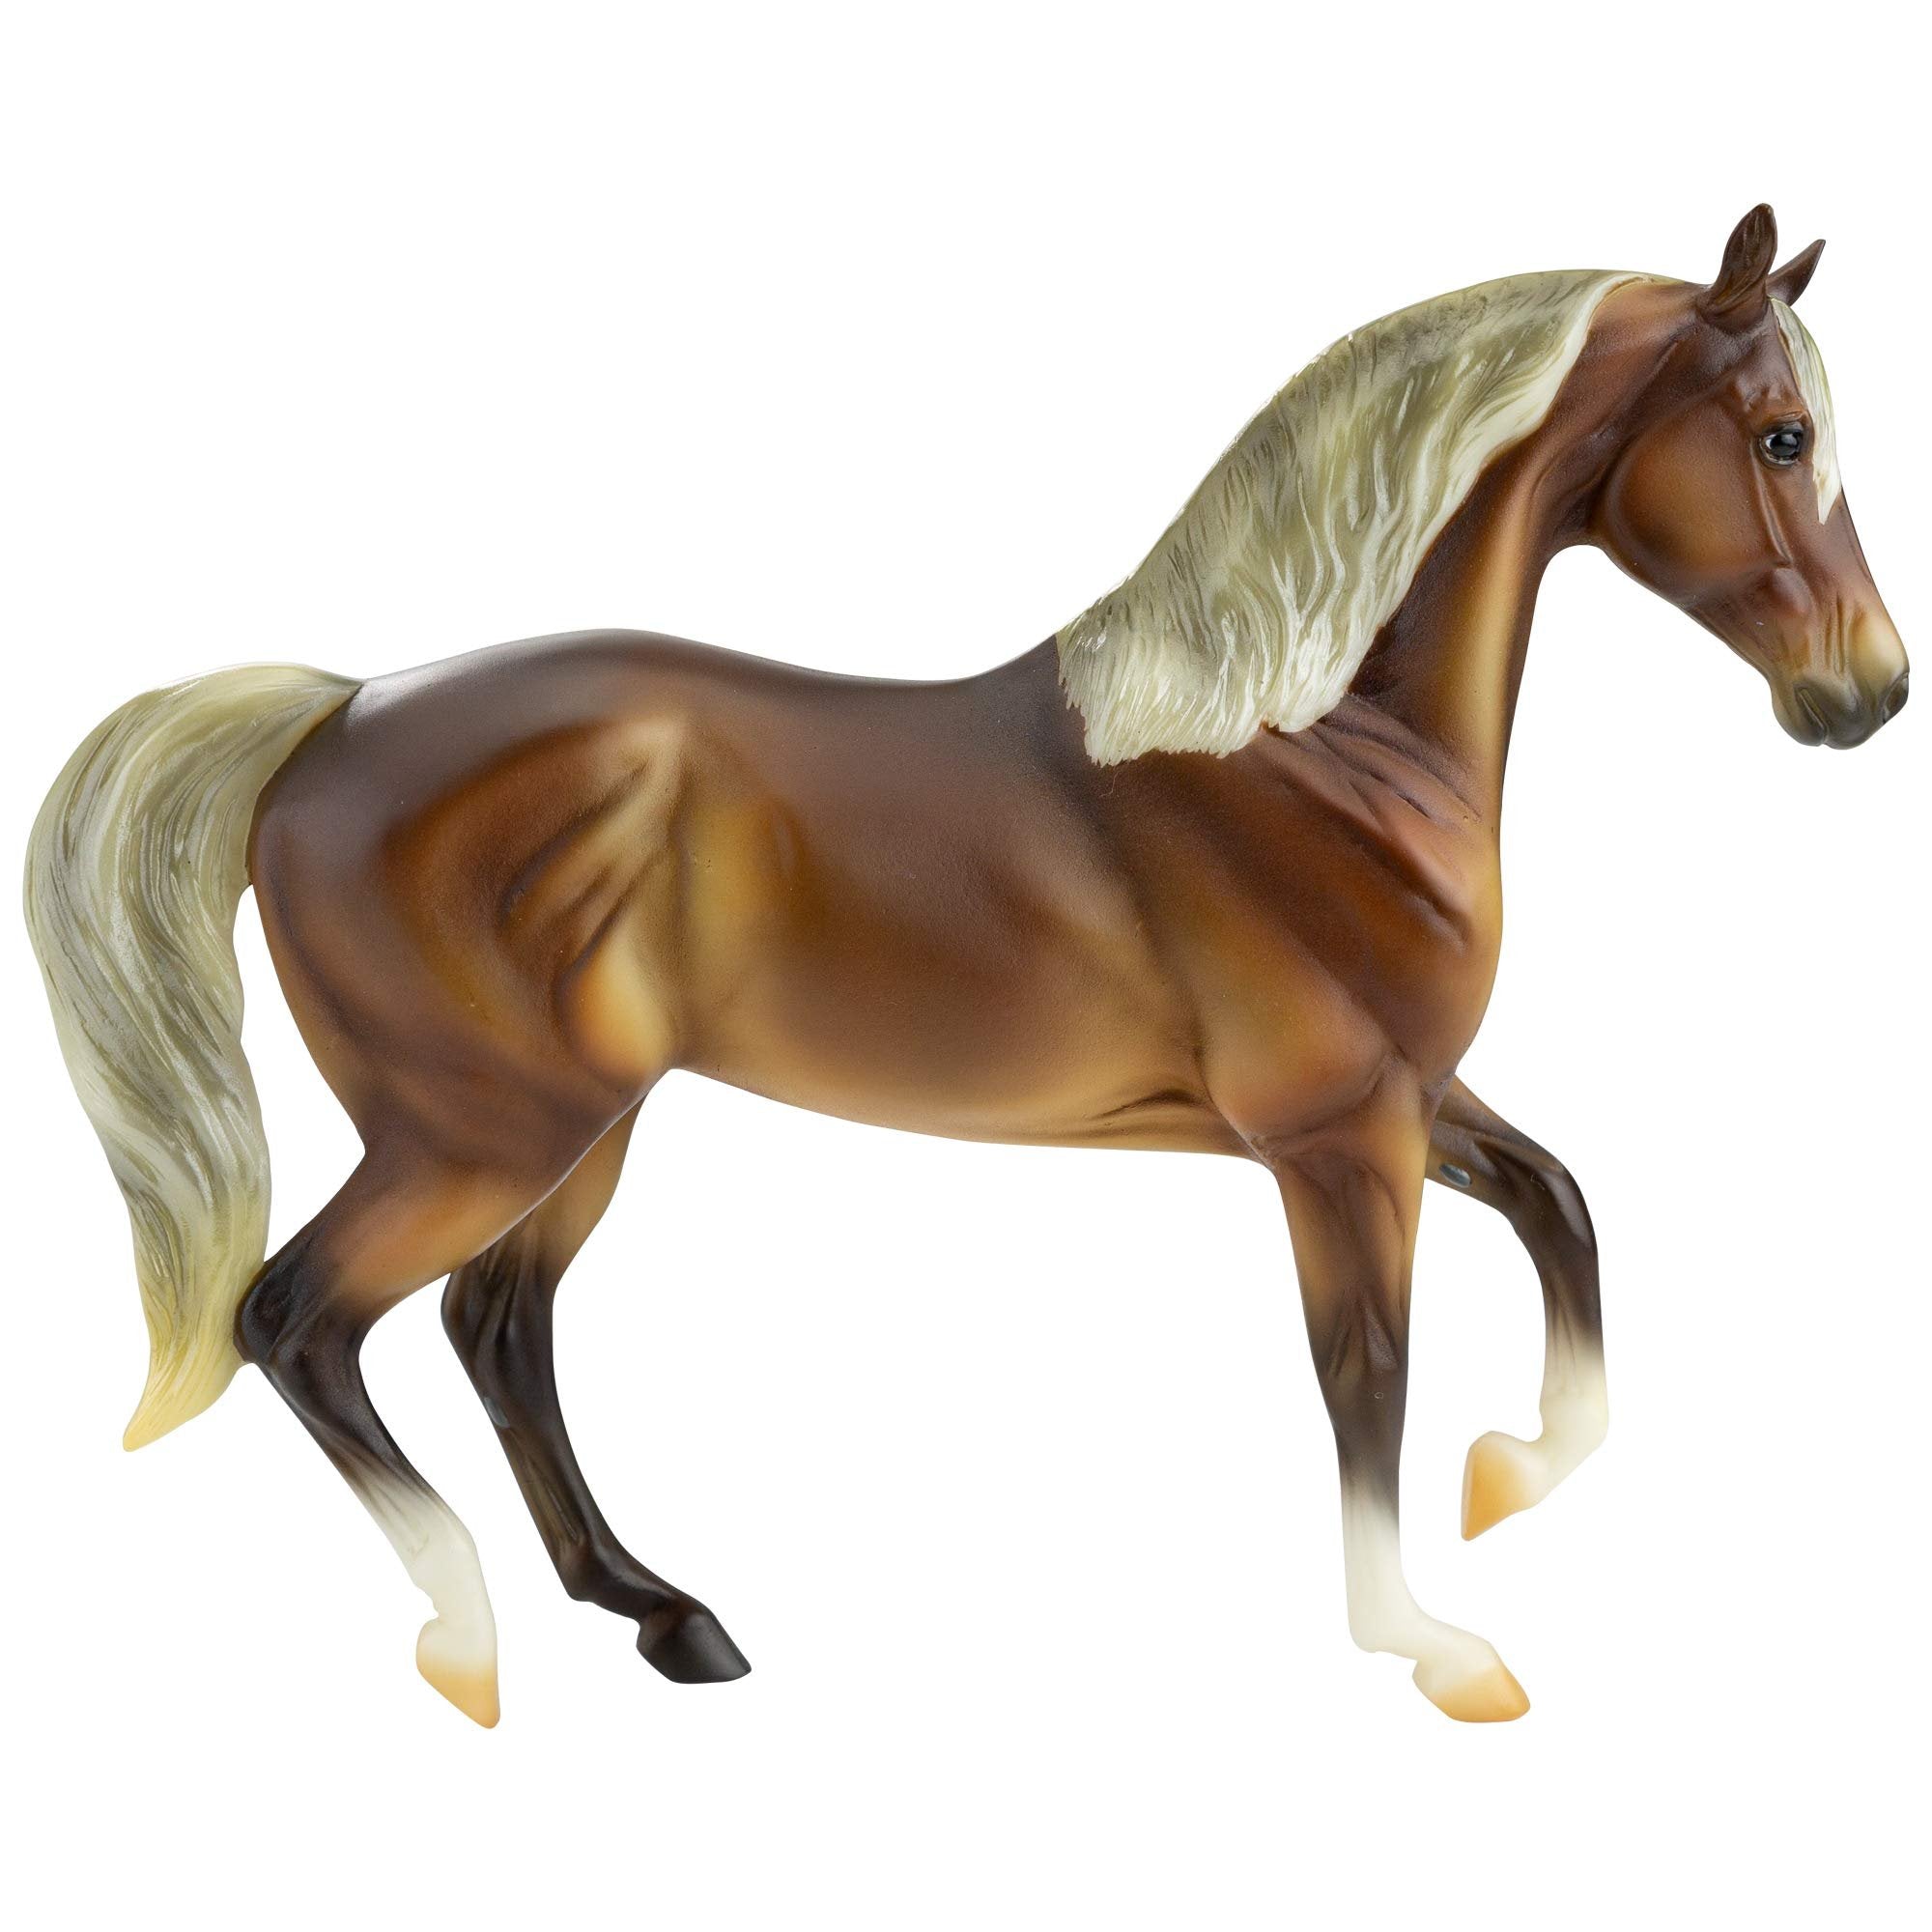 Breyer Horses Freedom Series Horse | Silver Bay Morab | 9.75" x 7" | 1:12 Scale | Horse Toy | Model #958, Brown